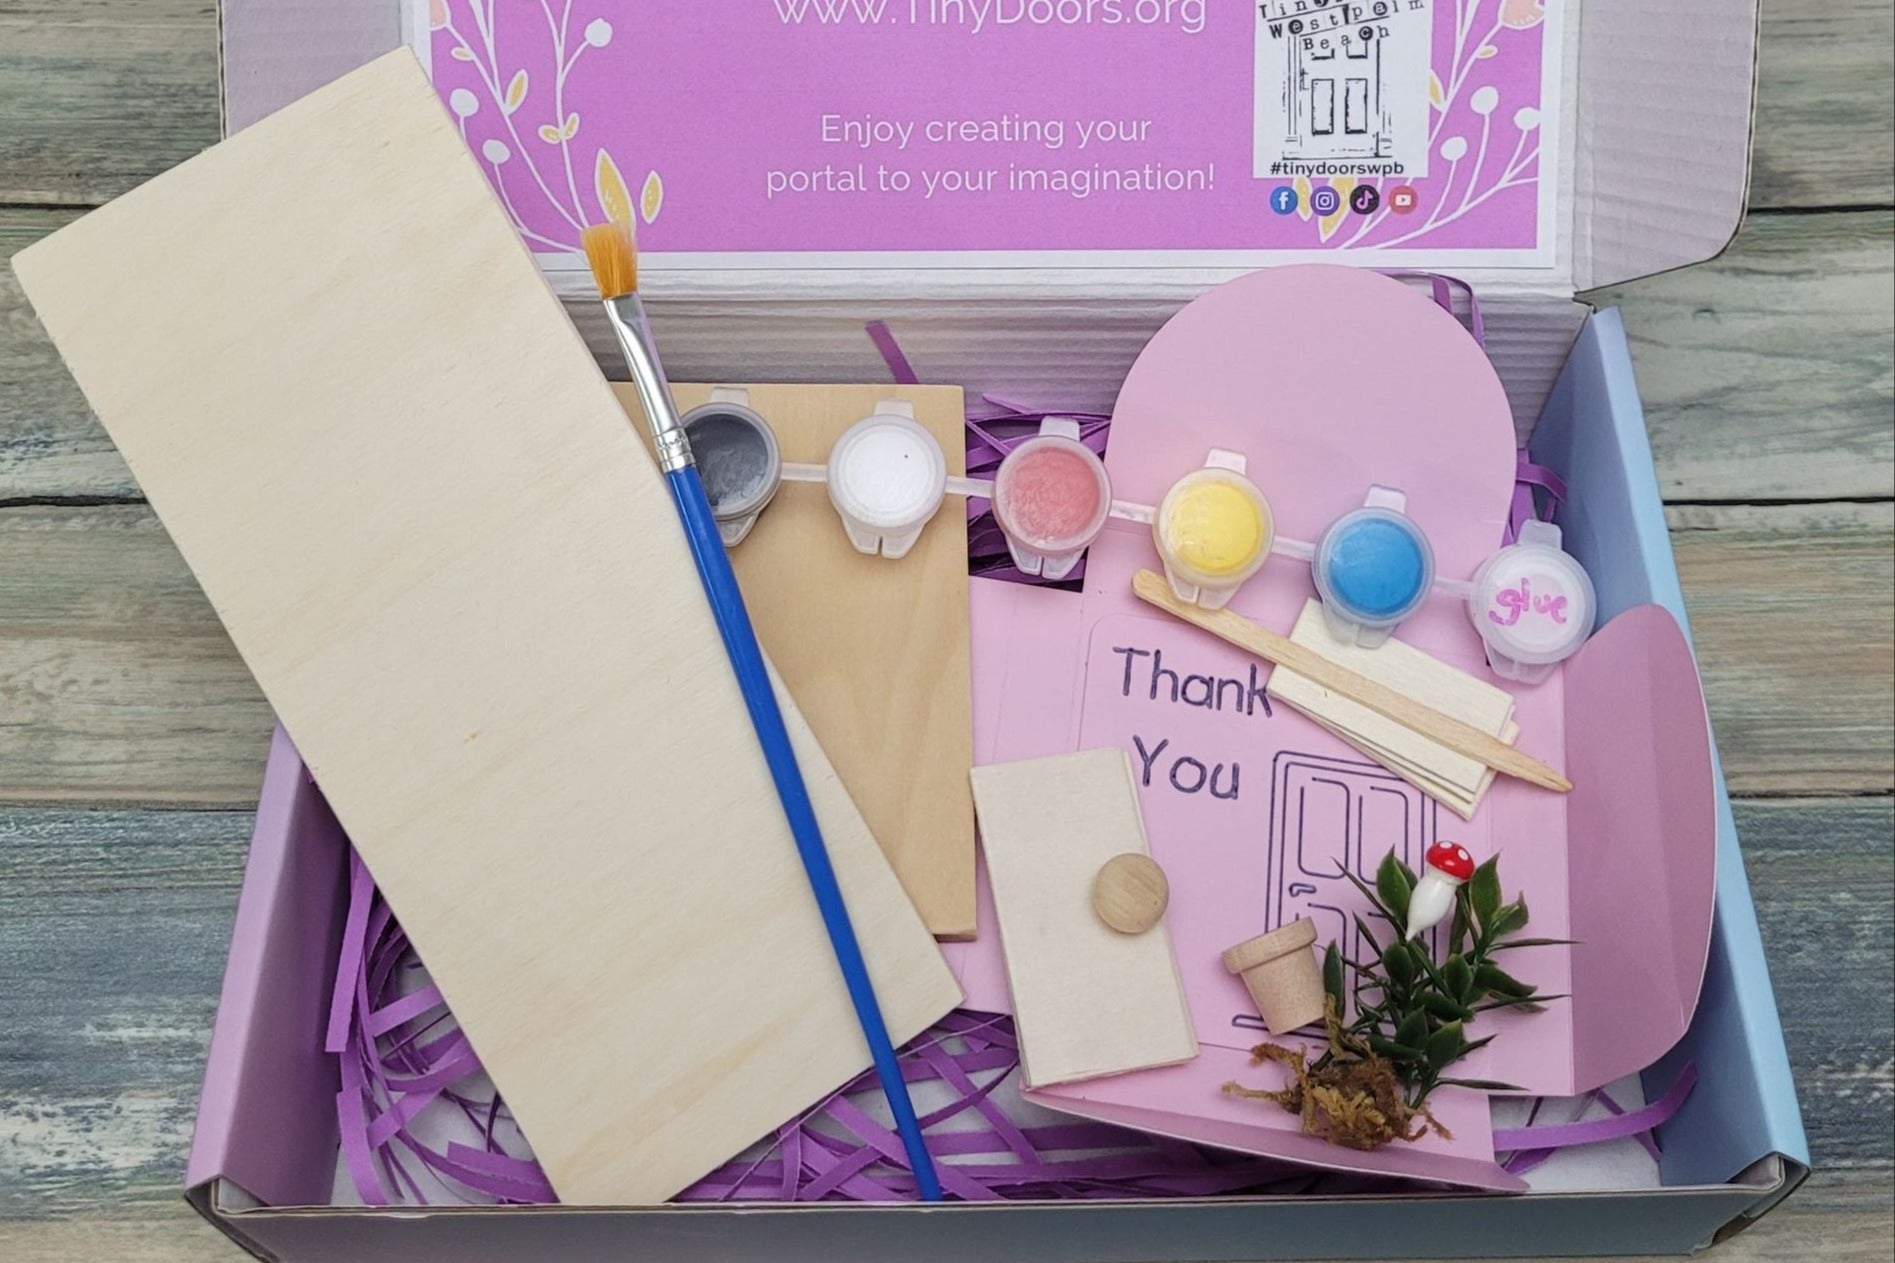 Monthly Sewing & Craft Boxes Delivered to your Door - Simply